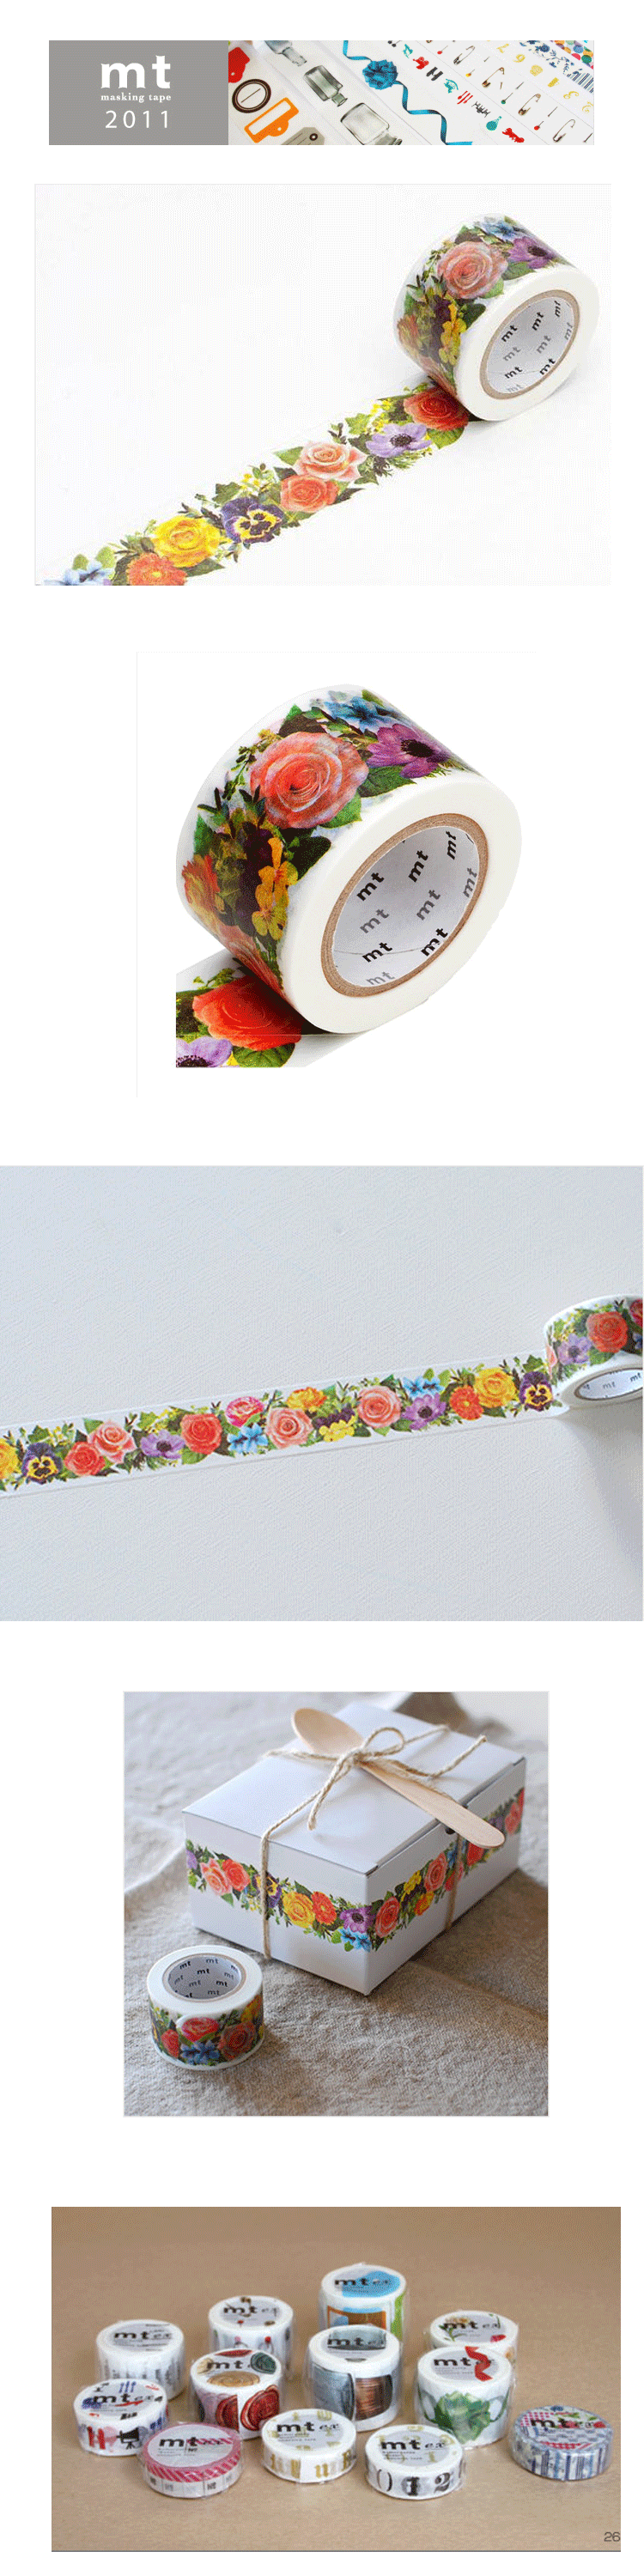 MT ex Flower Garden Tape Images [japanese stationery, mt ex tapes, mt japan, pretty stationery, beautiful gift wrap]